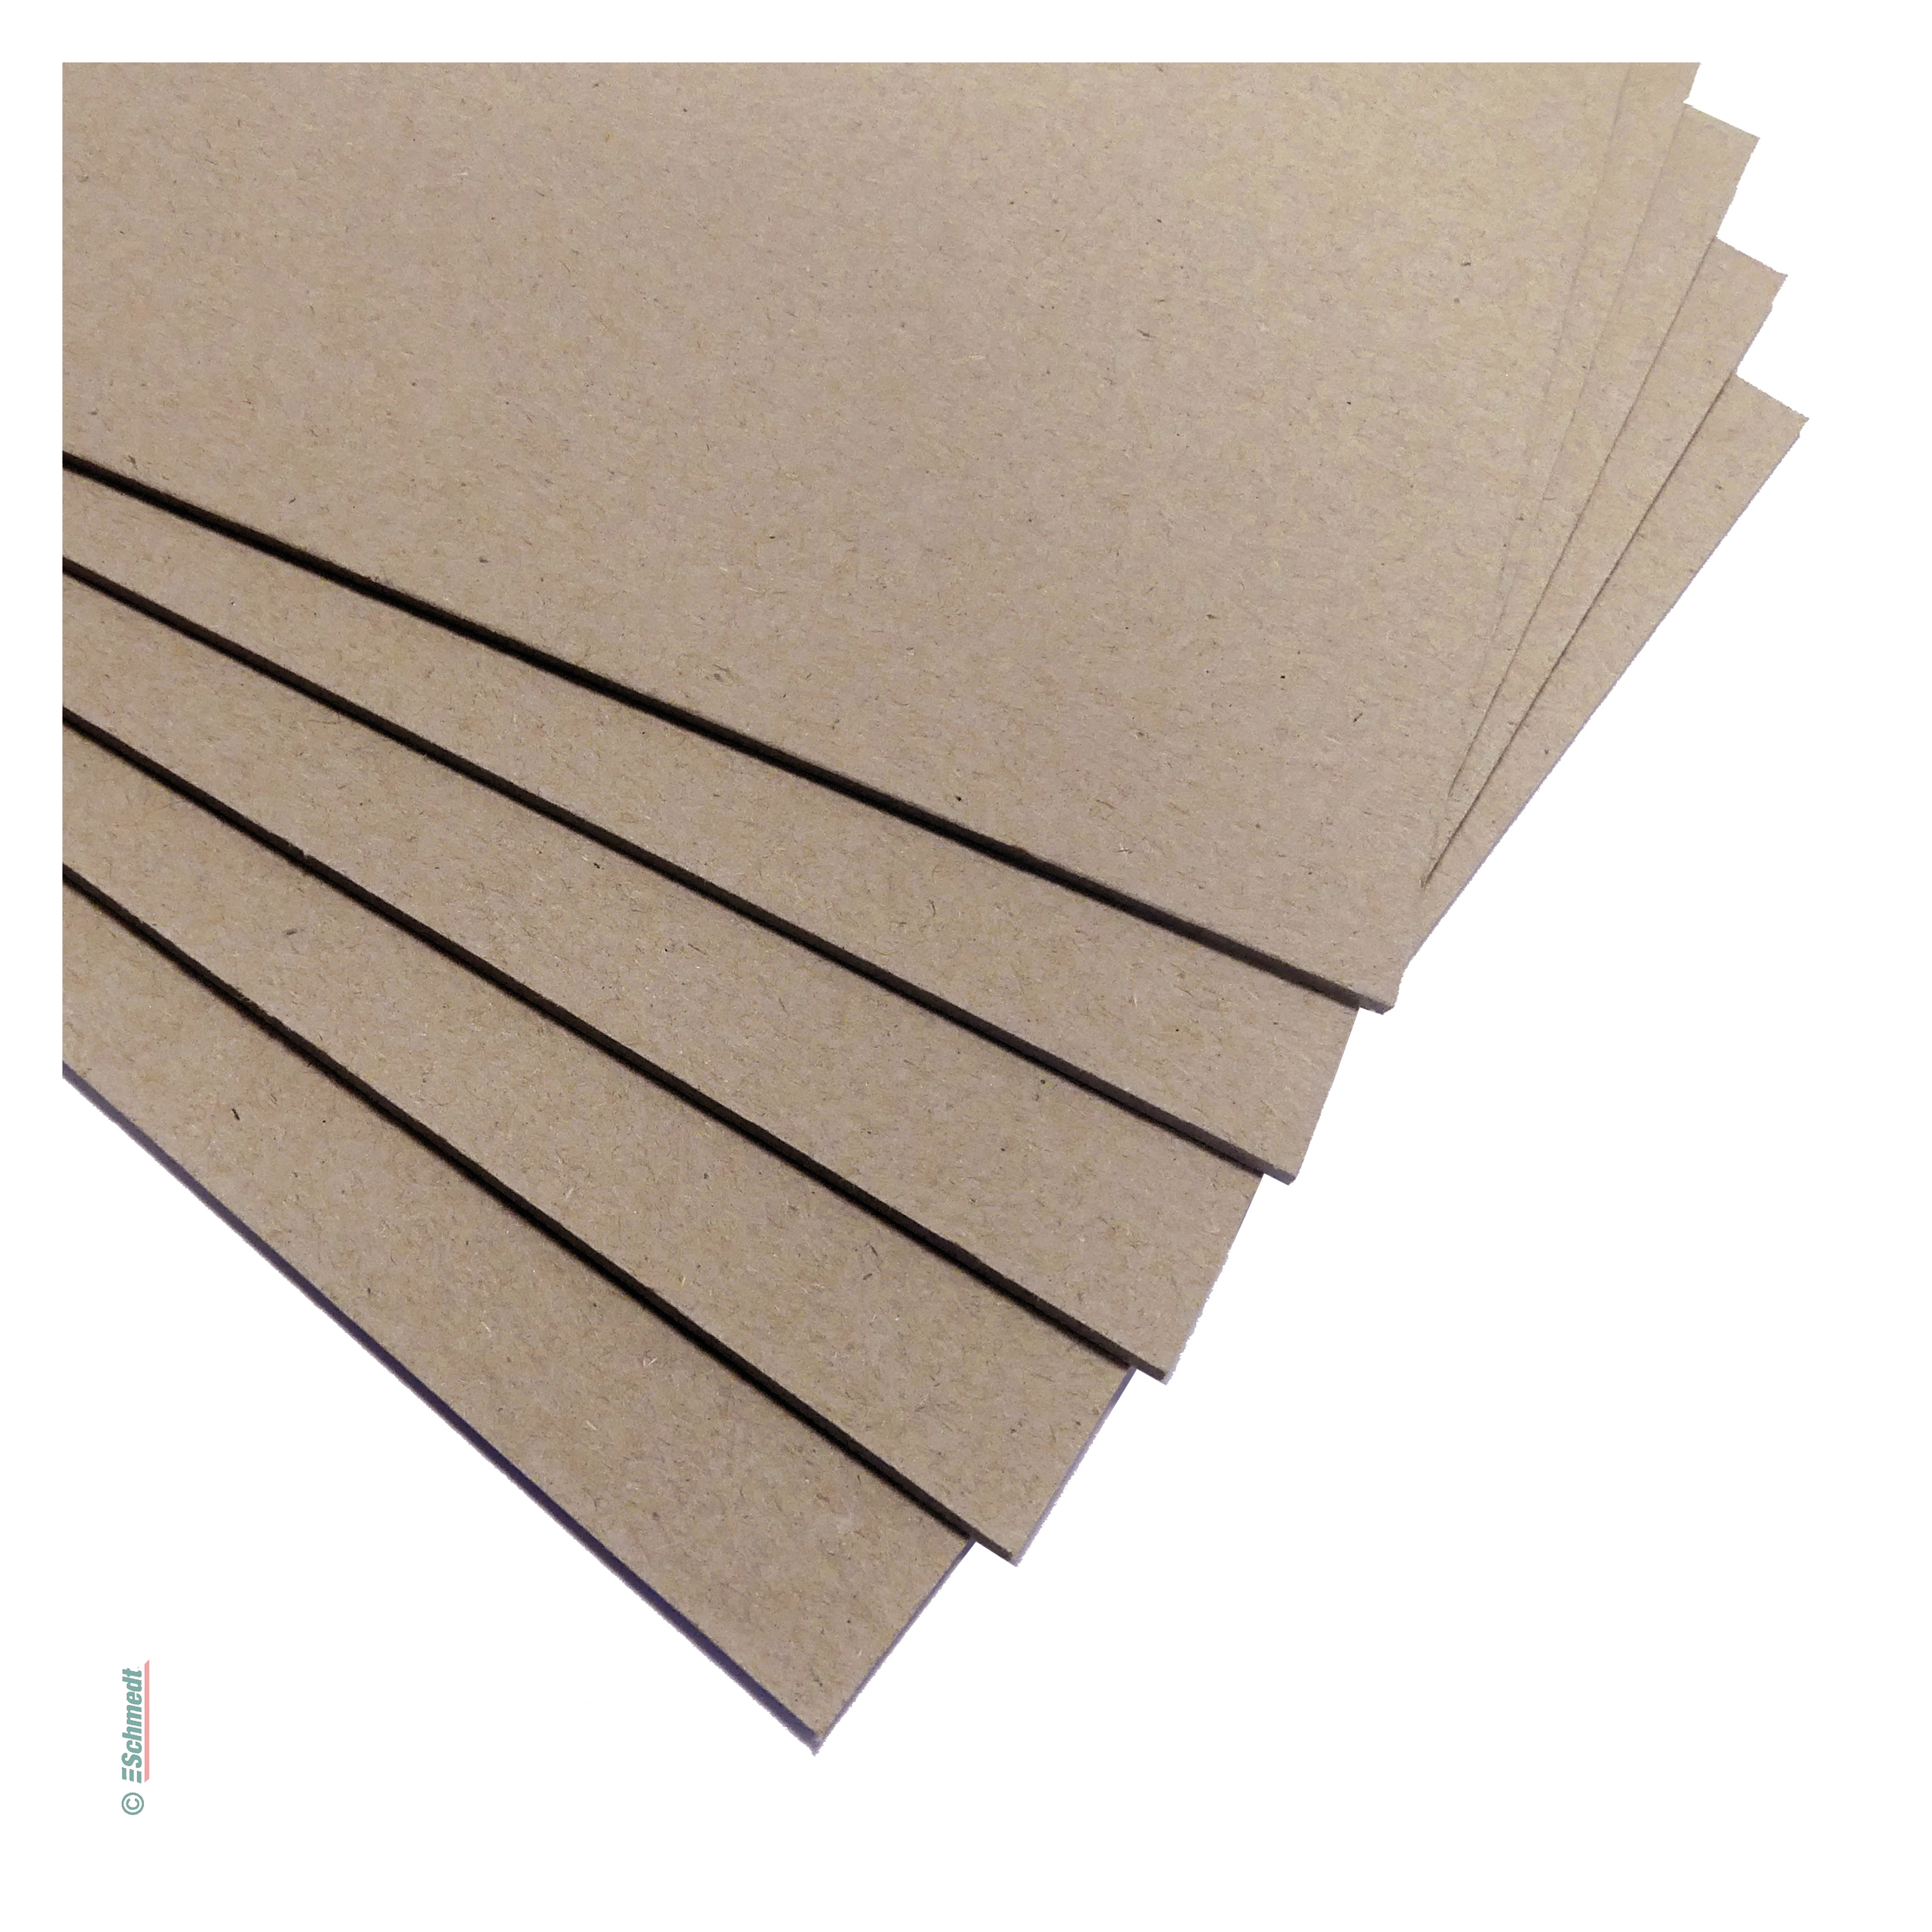 Grey board, light quality / kilo stock - Thickness: 2.0 mm - for the production of hardcover book cases (panels and spine), boxes etc....